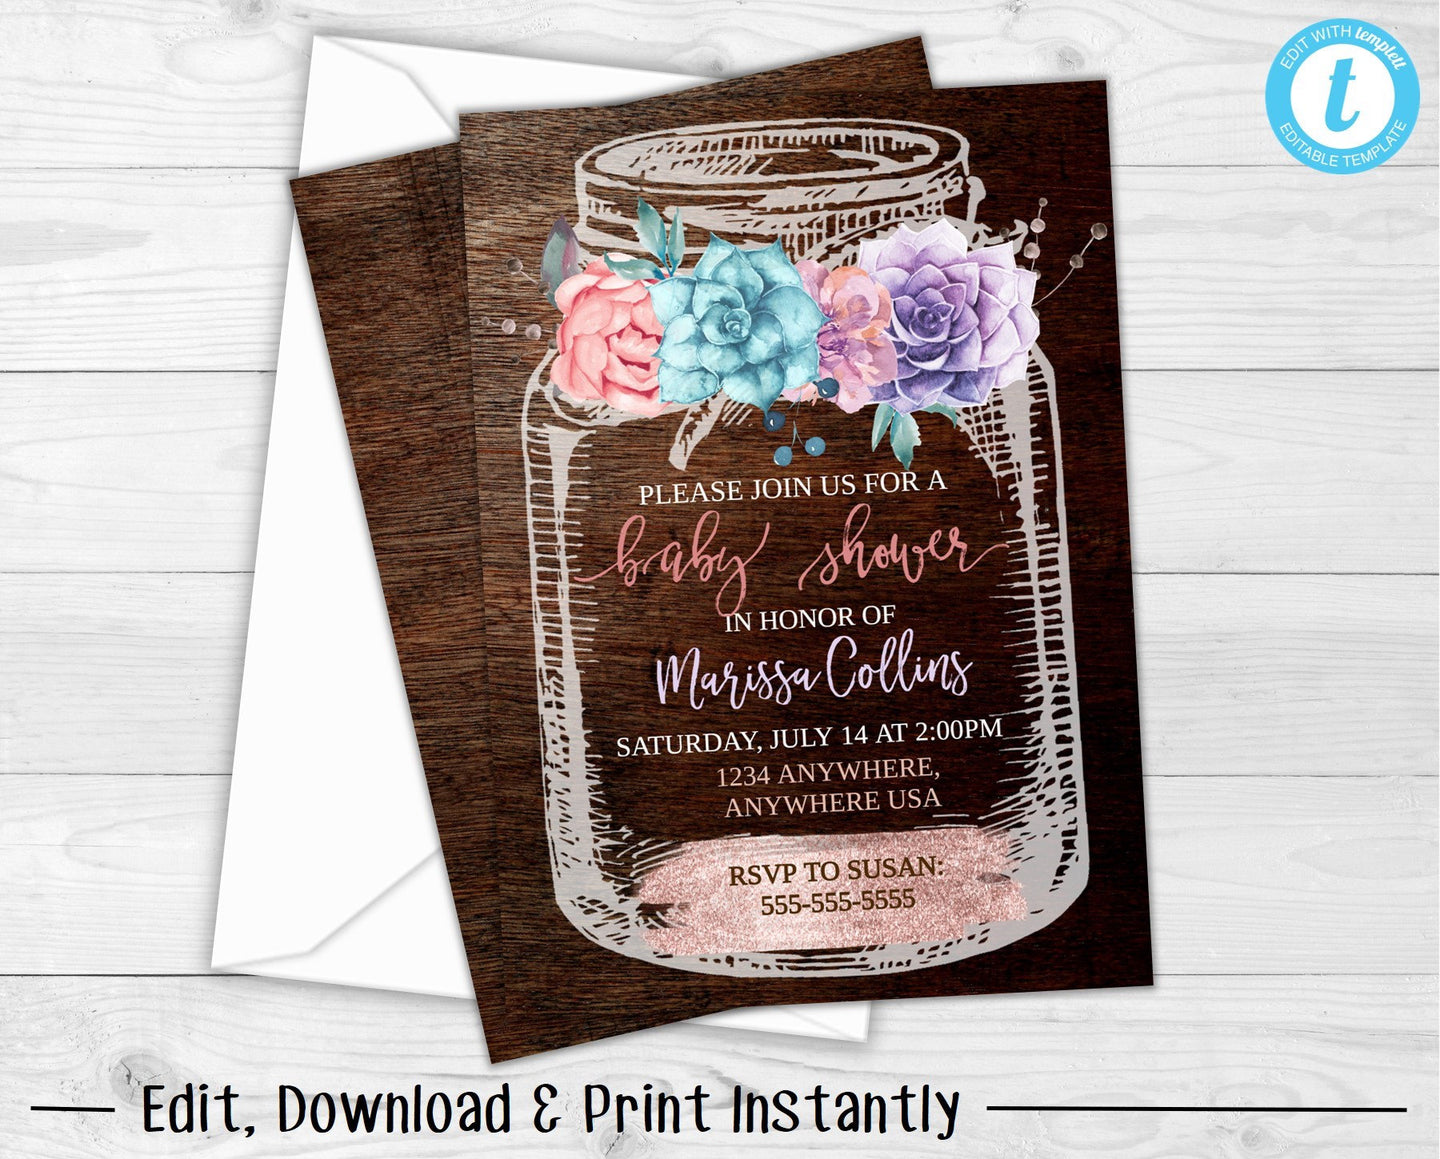 Baby Shower Invitation Template, Baby Shower Invitation, Rustic Baby Shower Invite, Mason Jar Baby Shower Invitation, Succulents, Printable